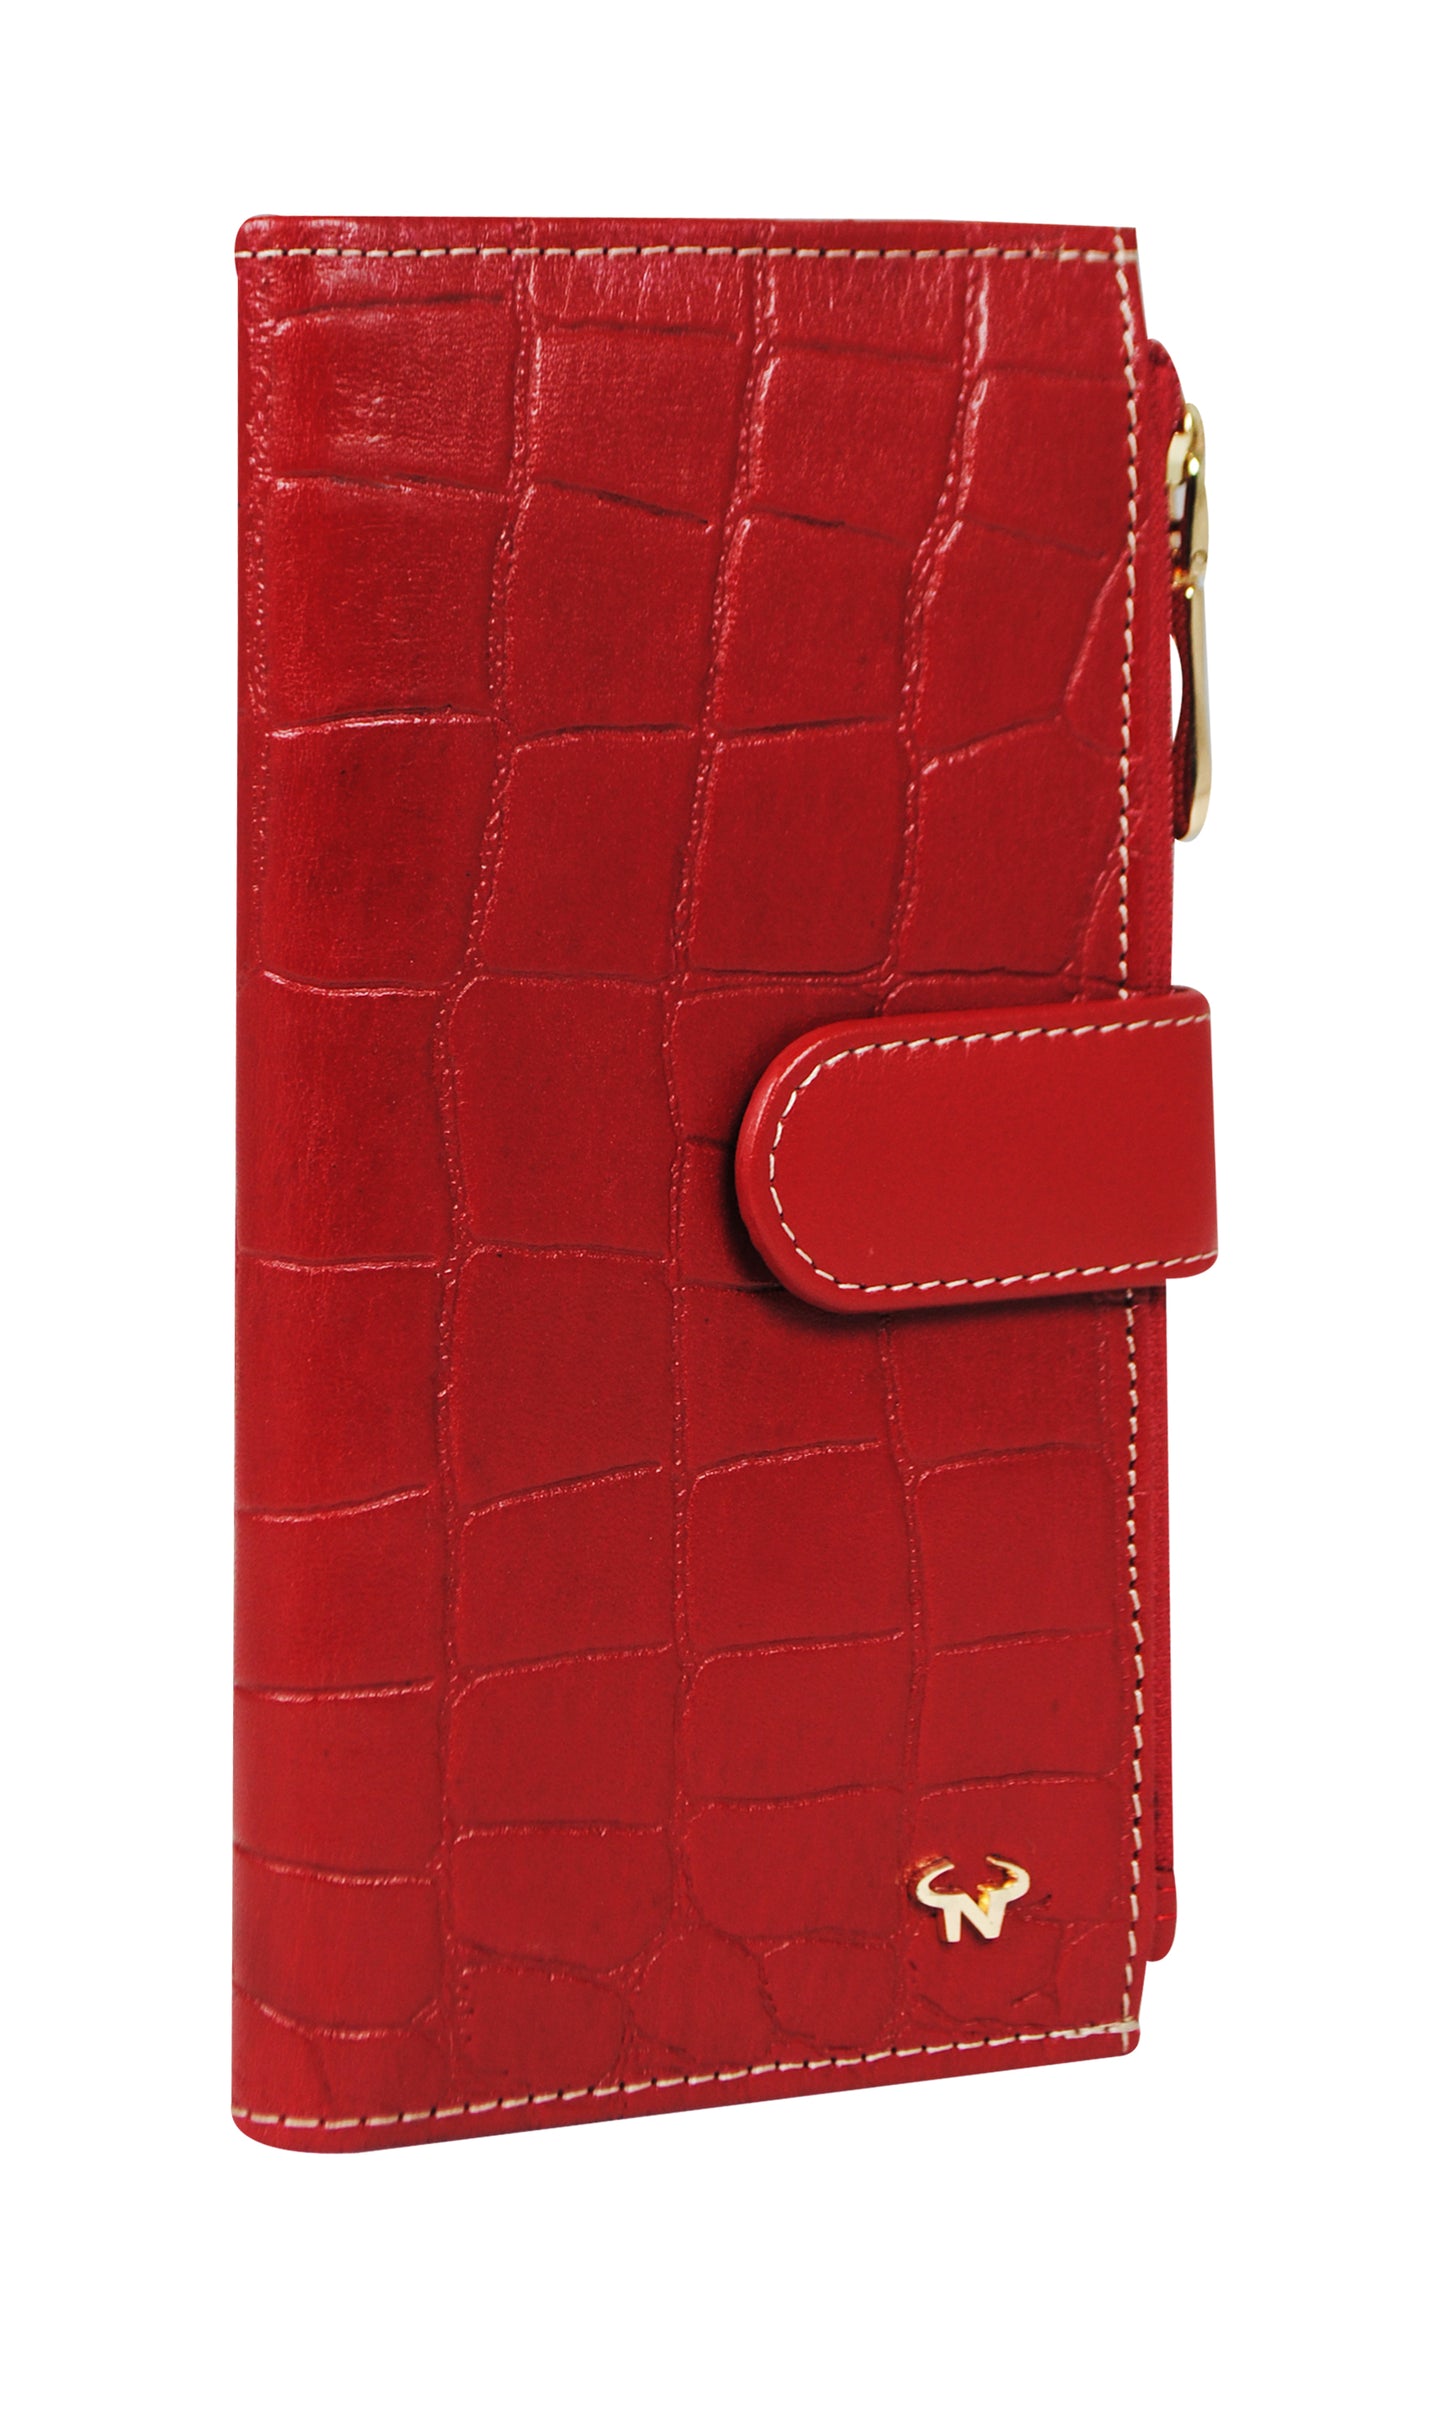 Calfnero Genuine Leather Women's wallet (1011-Red-Coco)